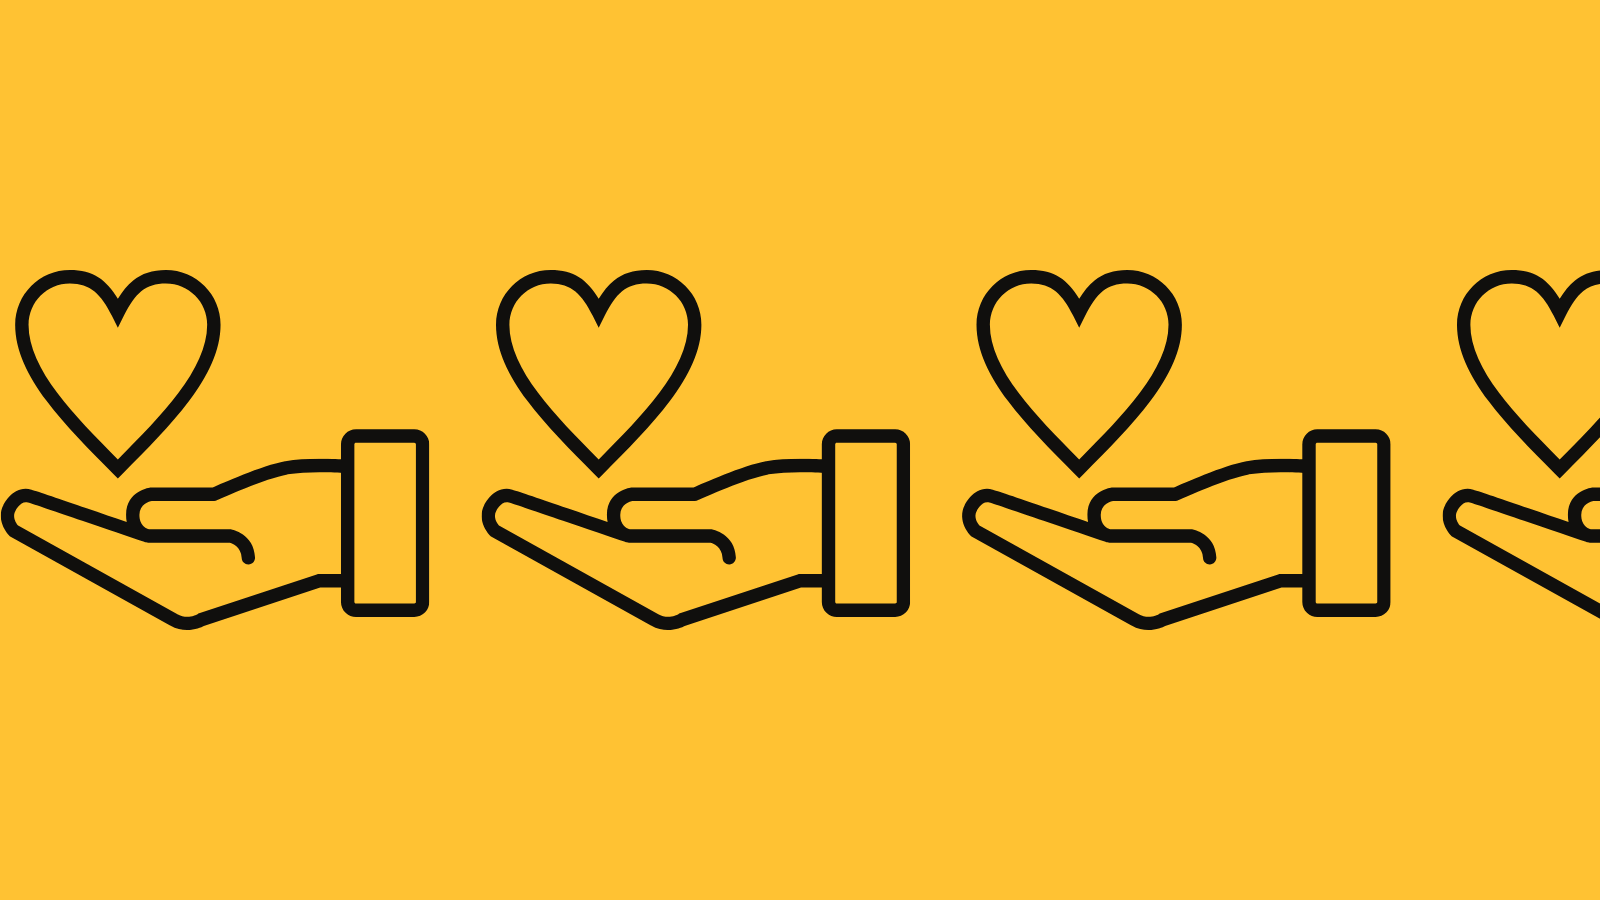 Icons of a hand holding out a heart in a row